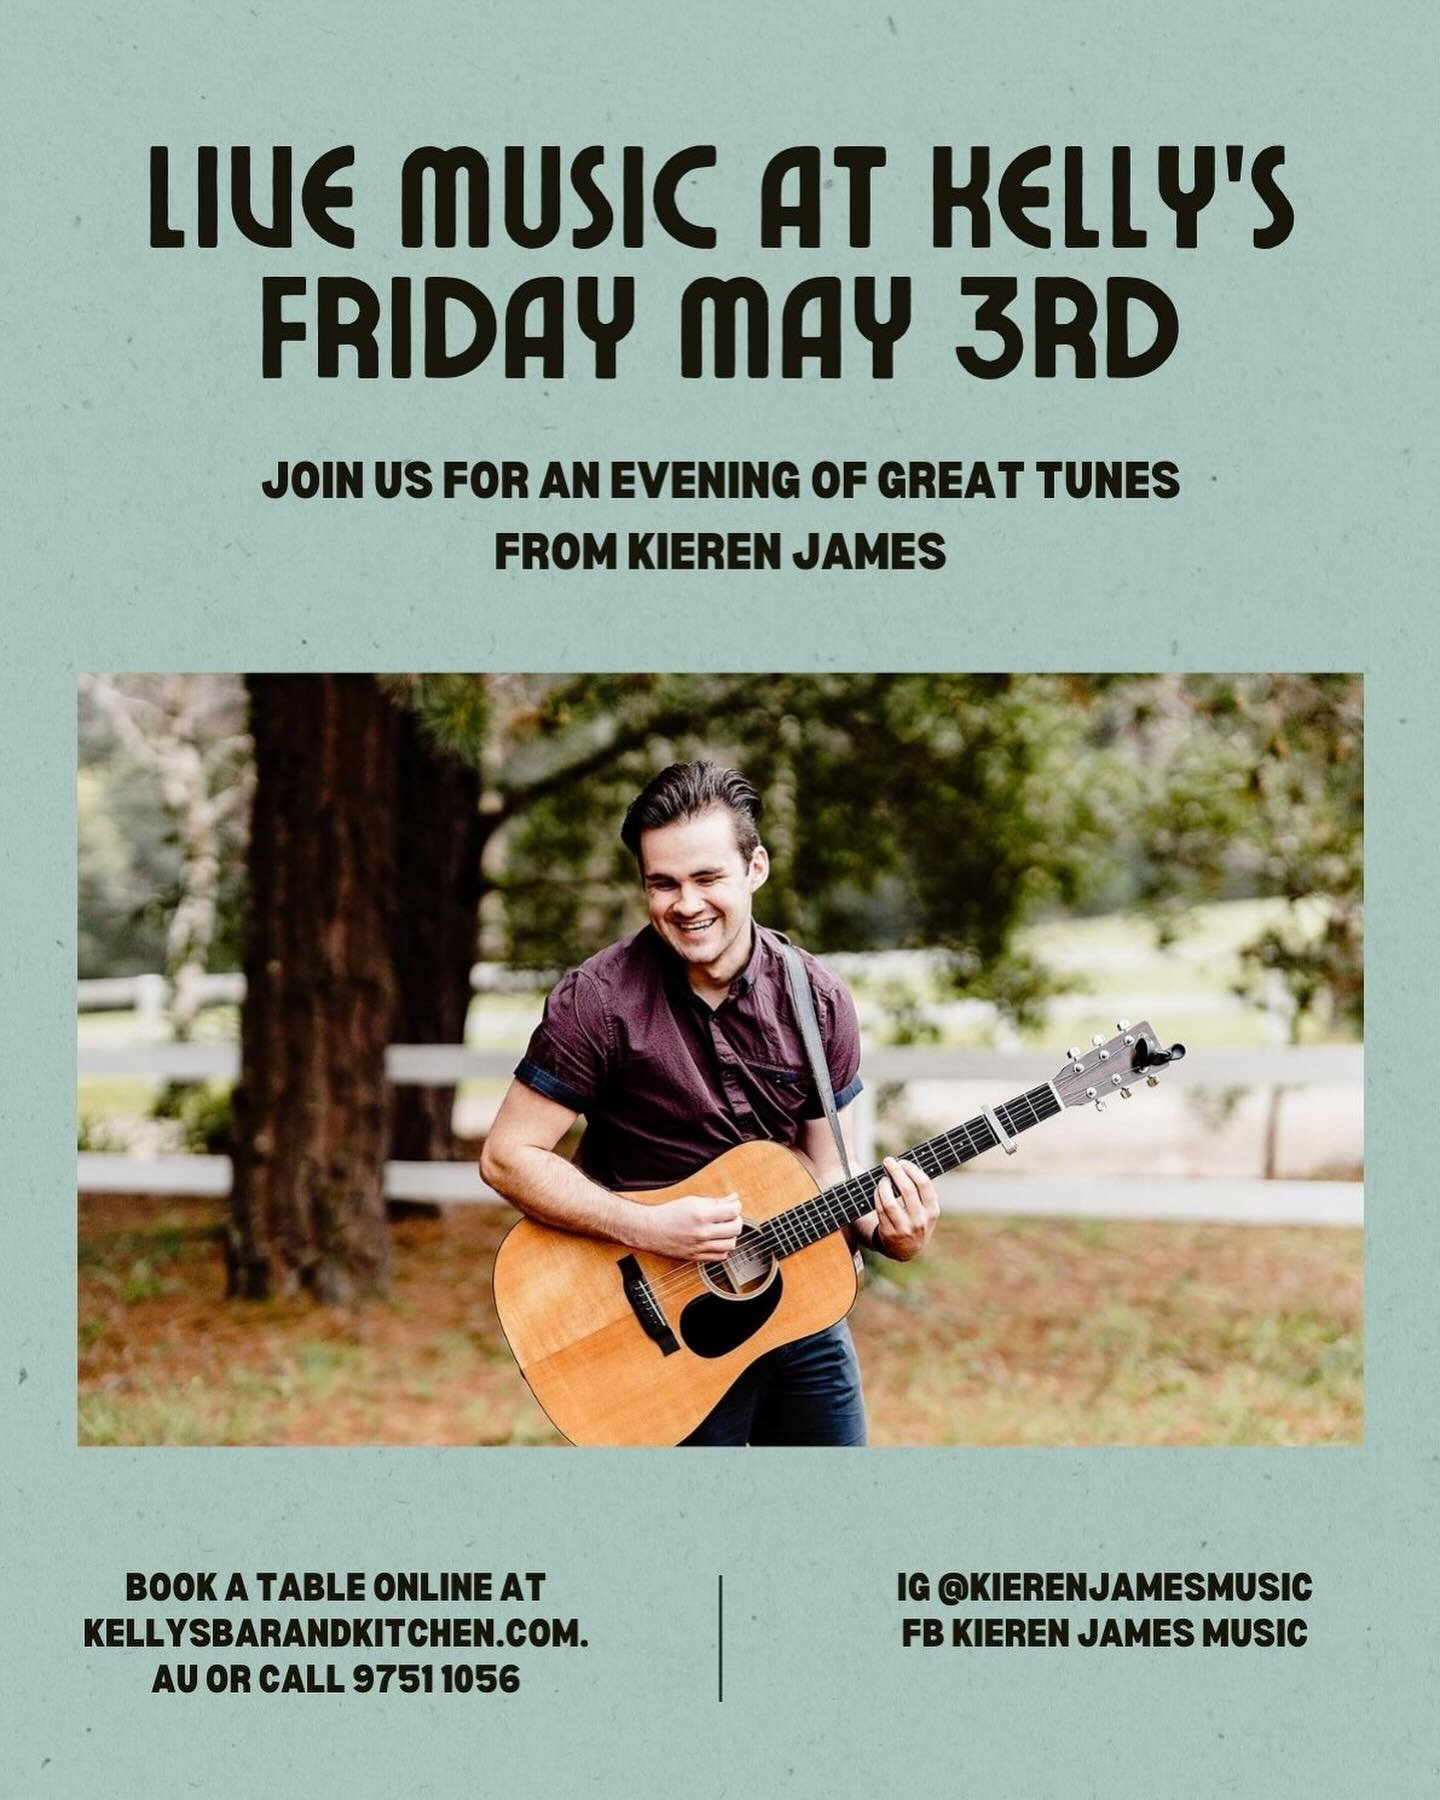 Don&rsquo;t miss out this Friday with @kierenjamesmusic lighting up Kelly&rsquo;s from 7pm - 9pm 🎶

Head to our website or call 9751 1056 to make a booking